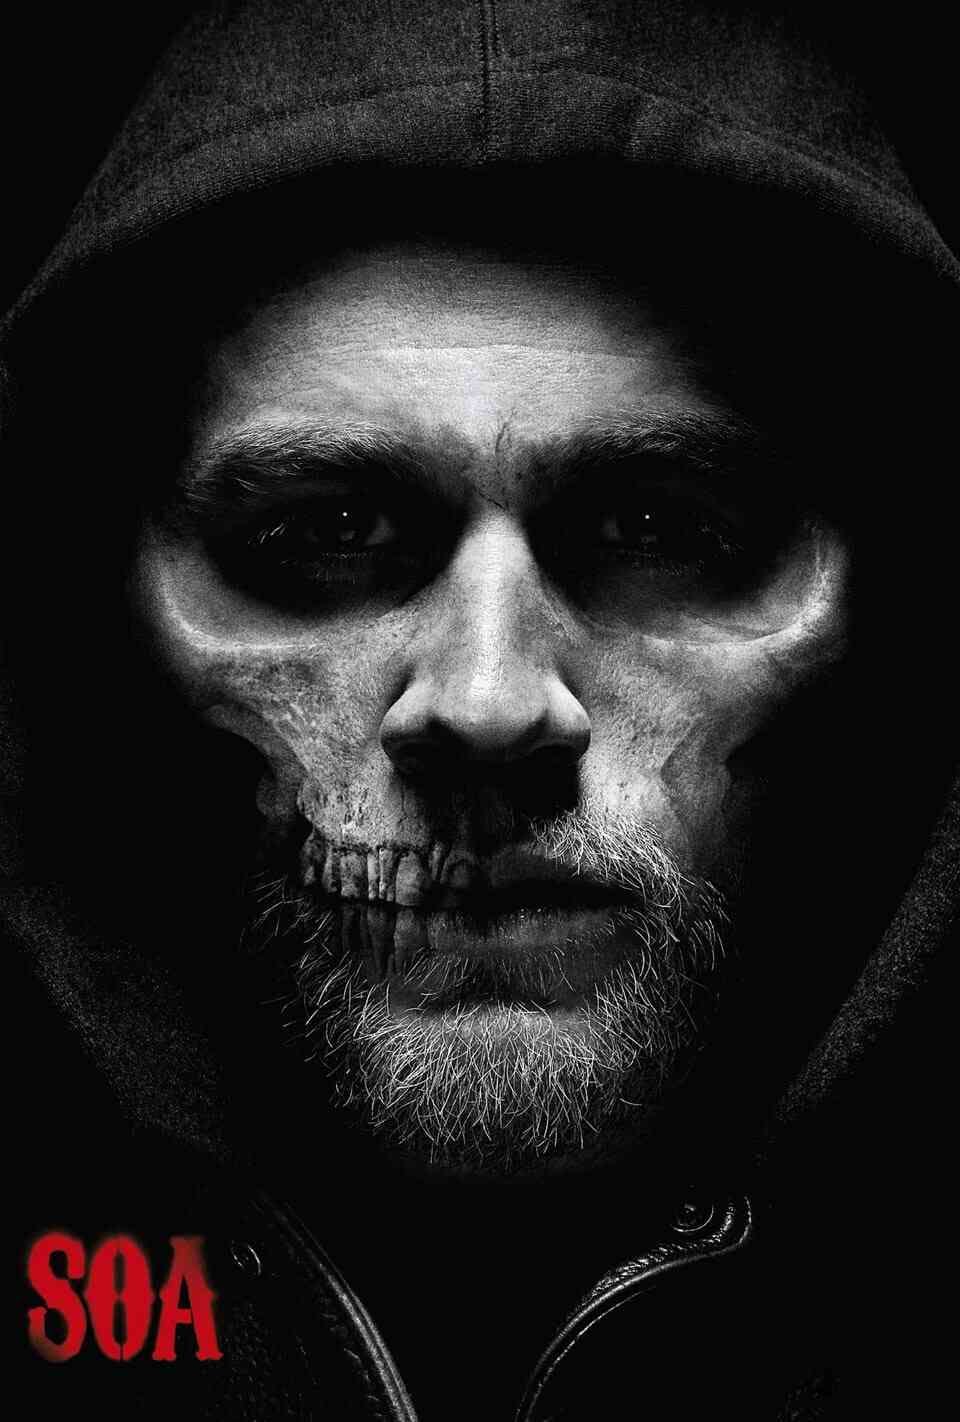 Read Sons of Anarchy screenplay.